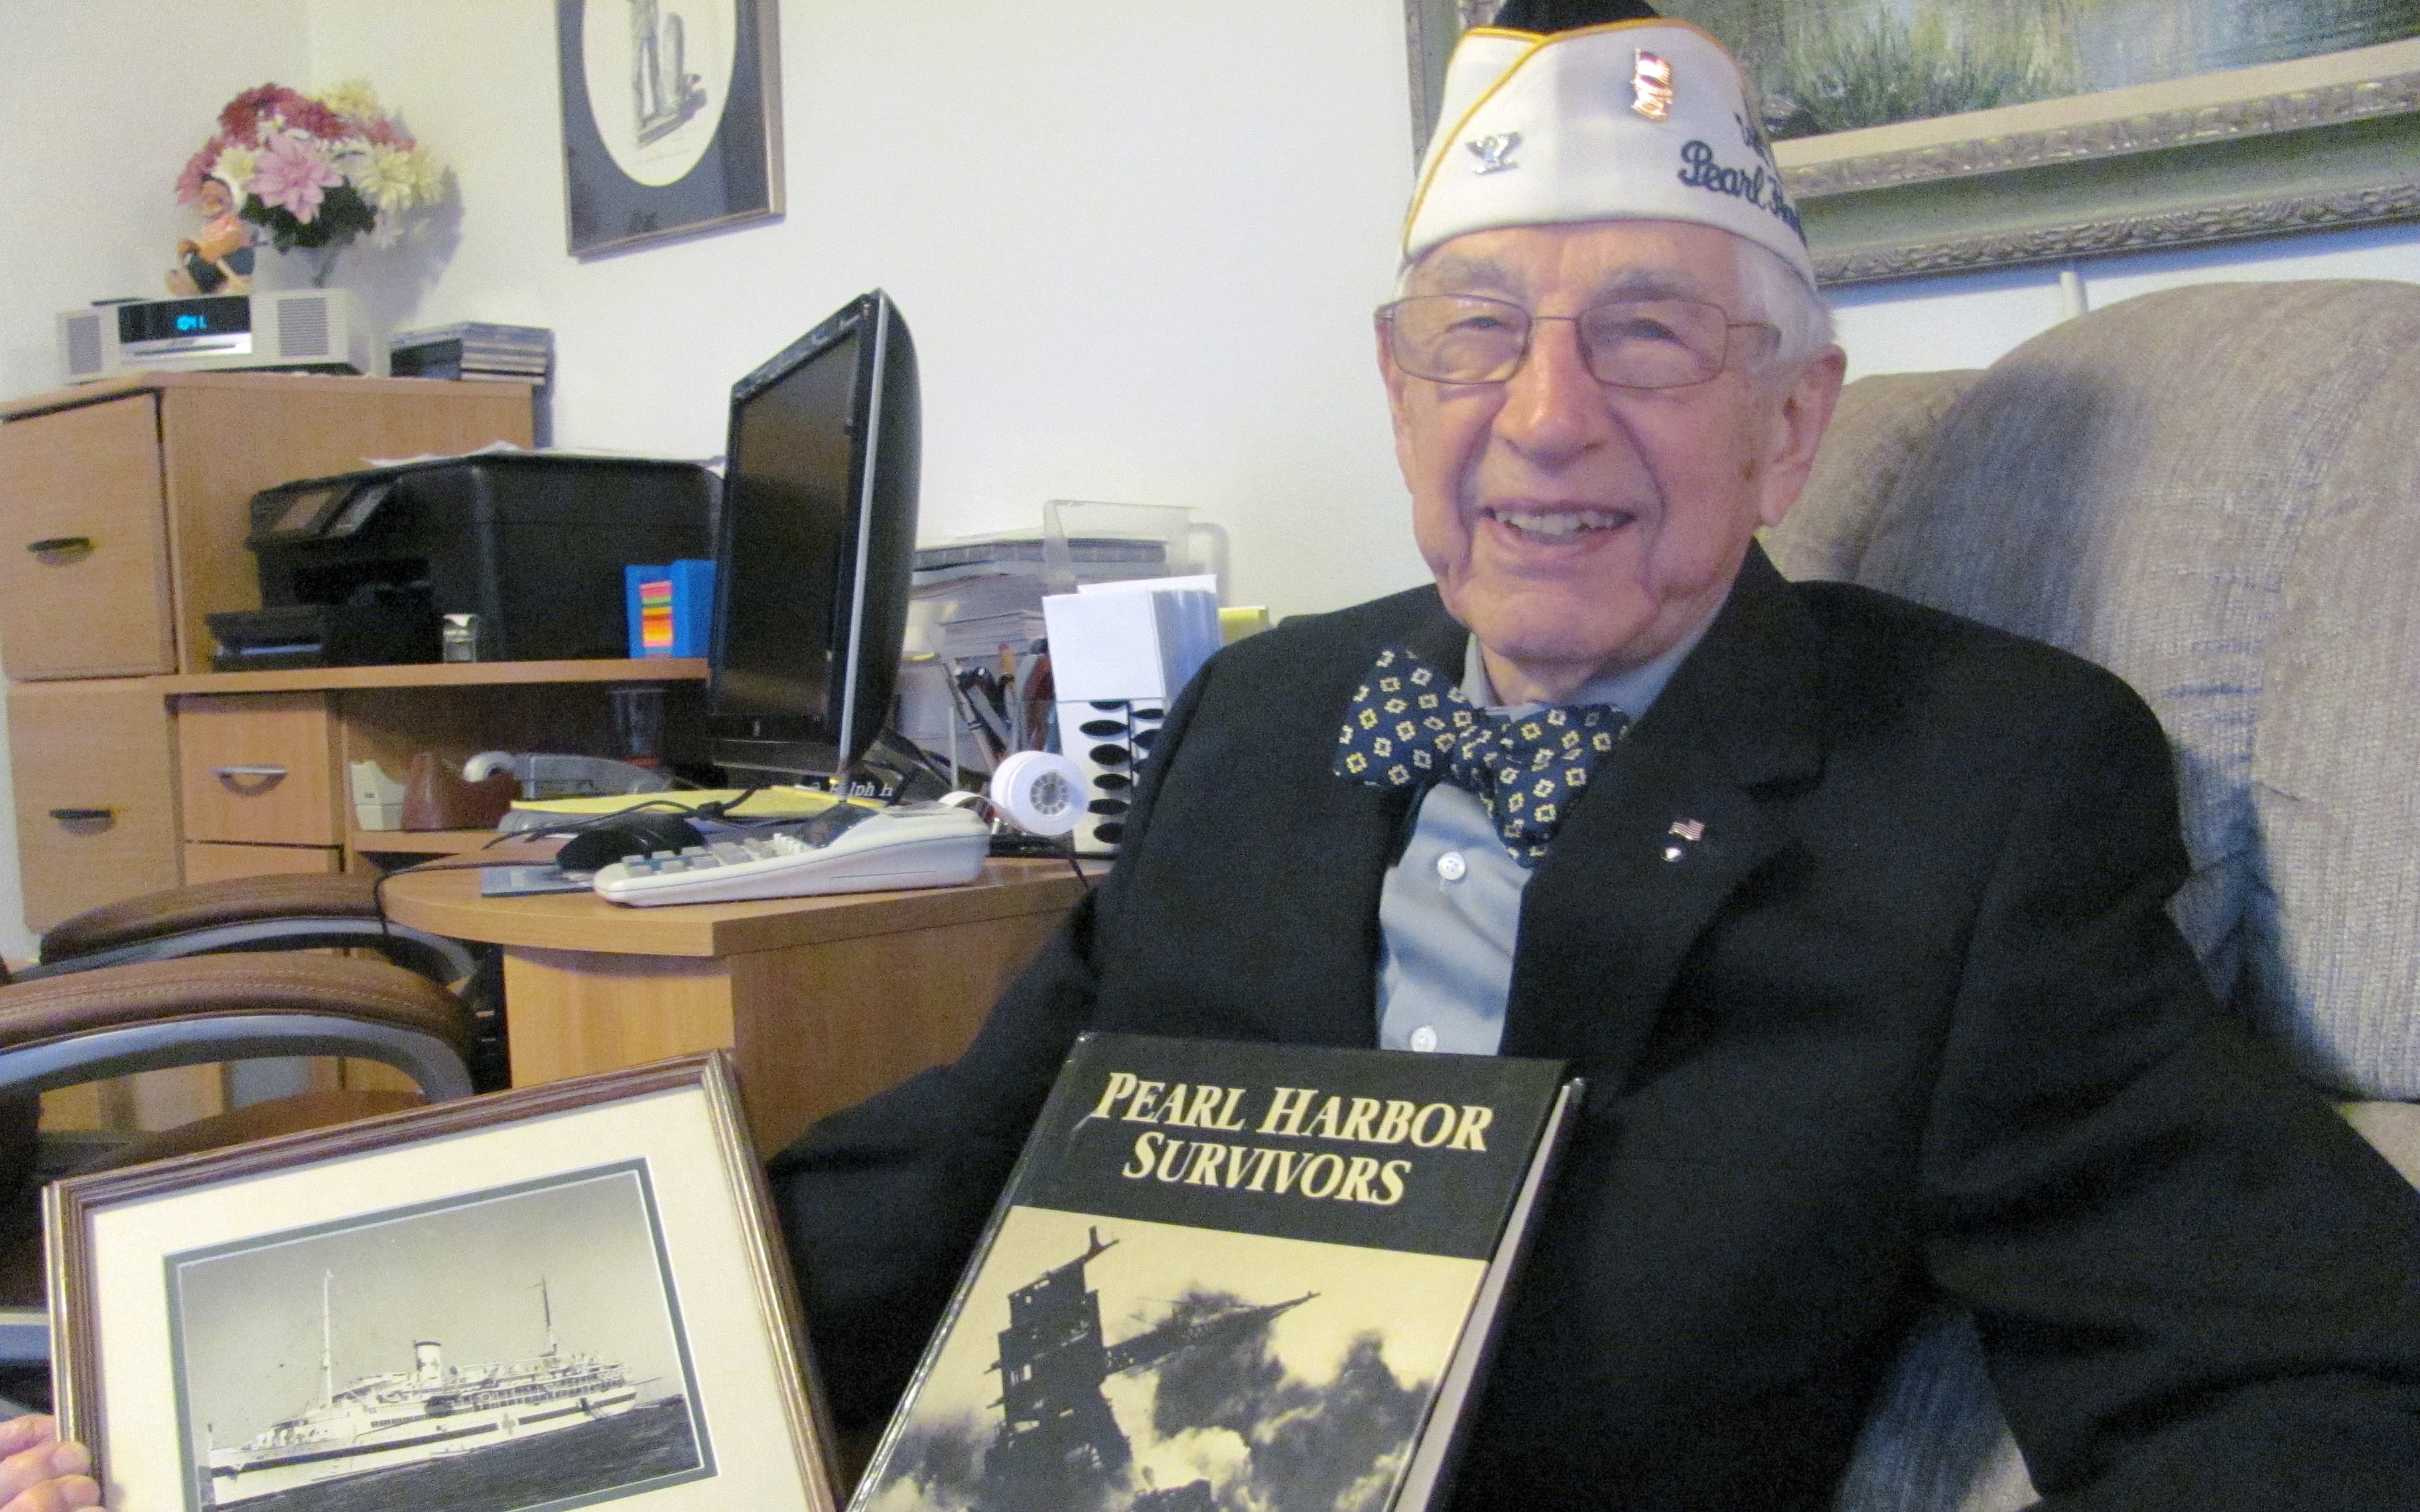 Ralph Laedtke, 90, is among the survivors of the Japanese attack on Pearl Harbor Dec. 7, 1941. He served on the USS Solace (pictured in framed photo), which provided medical services. Laedtke's wife Ferne (Bottemiller) Laedtke grew up in Washougal. The couple recently moved from Illinois to this area.